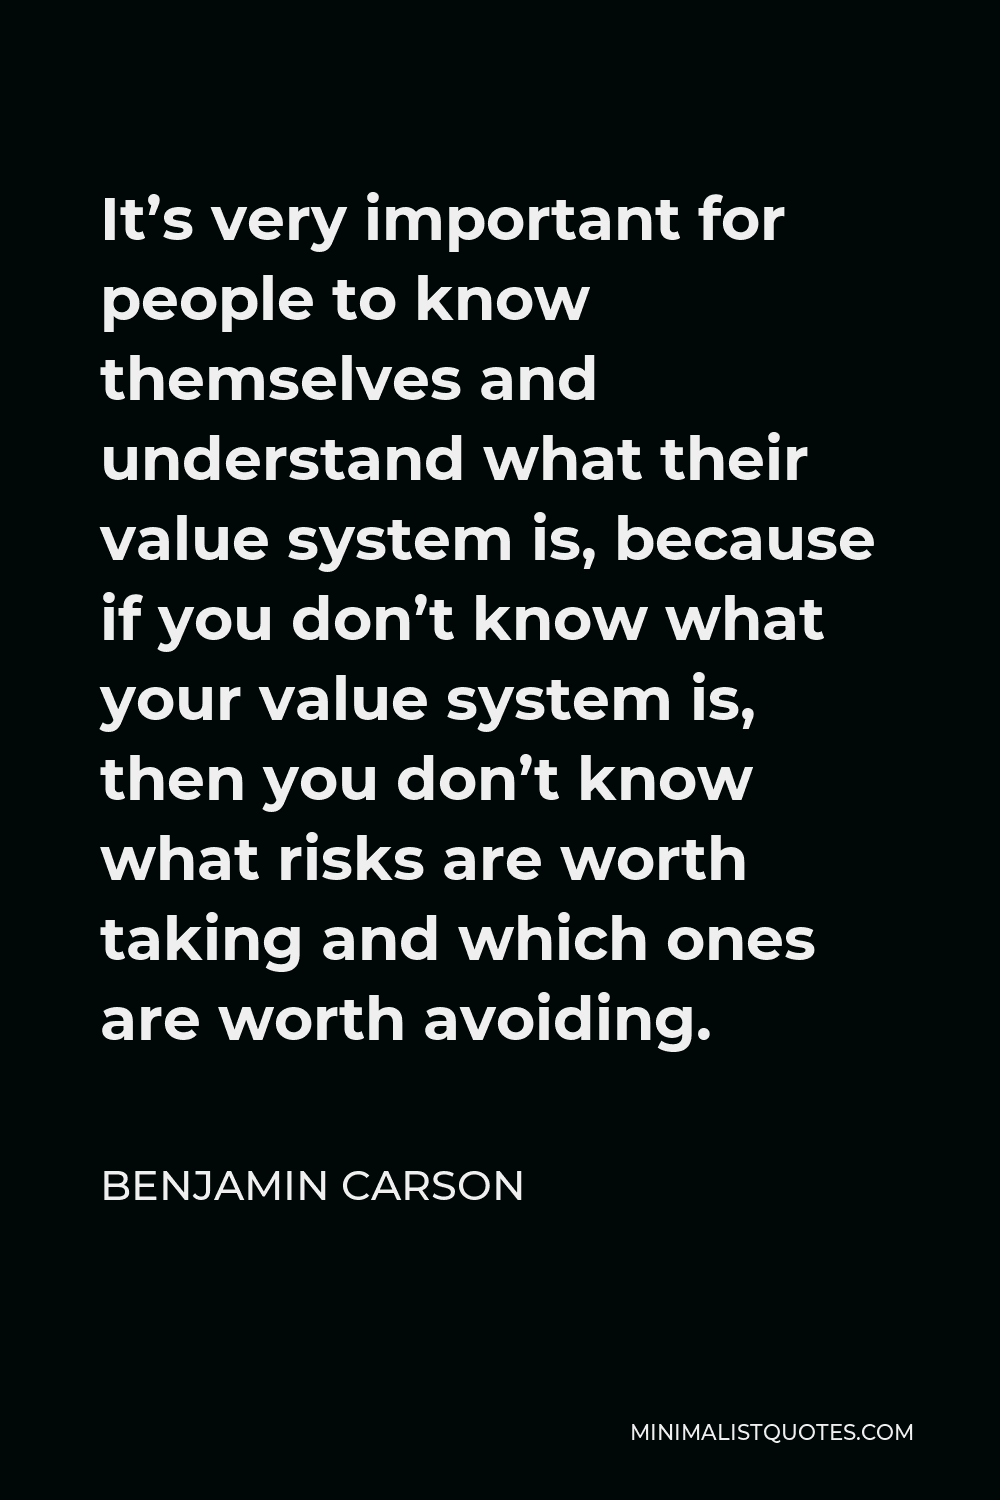 Benjamin Carson Quote - It’s very important for people to know themselves and understand what their value system is, because if you don’t know what your value system is, then you don’t know what risks are worth taking and which ones are worth avoiding.